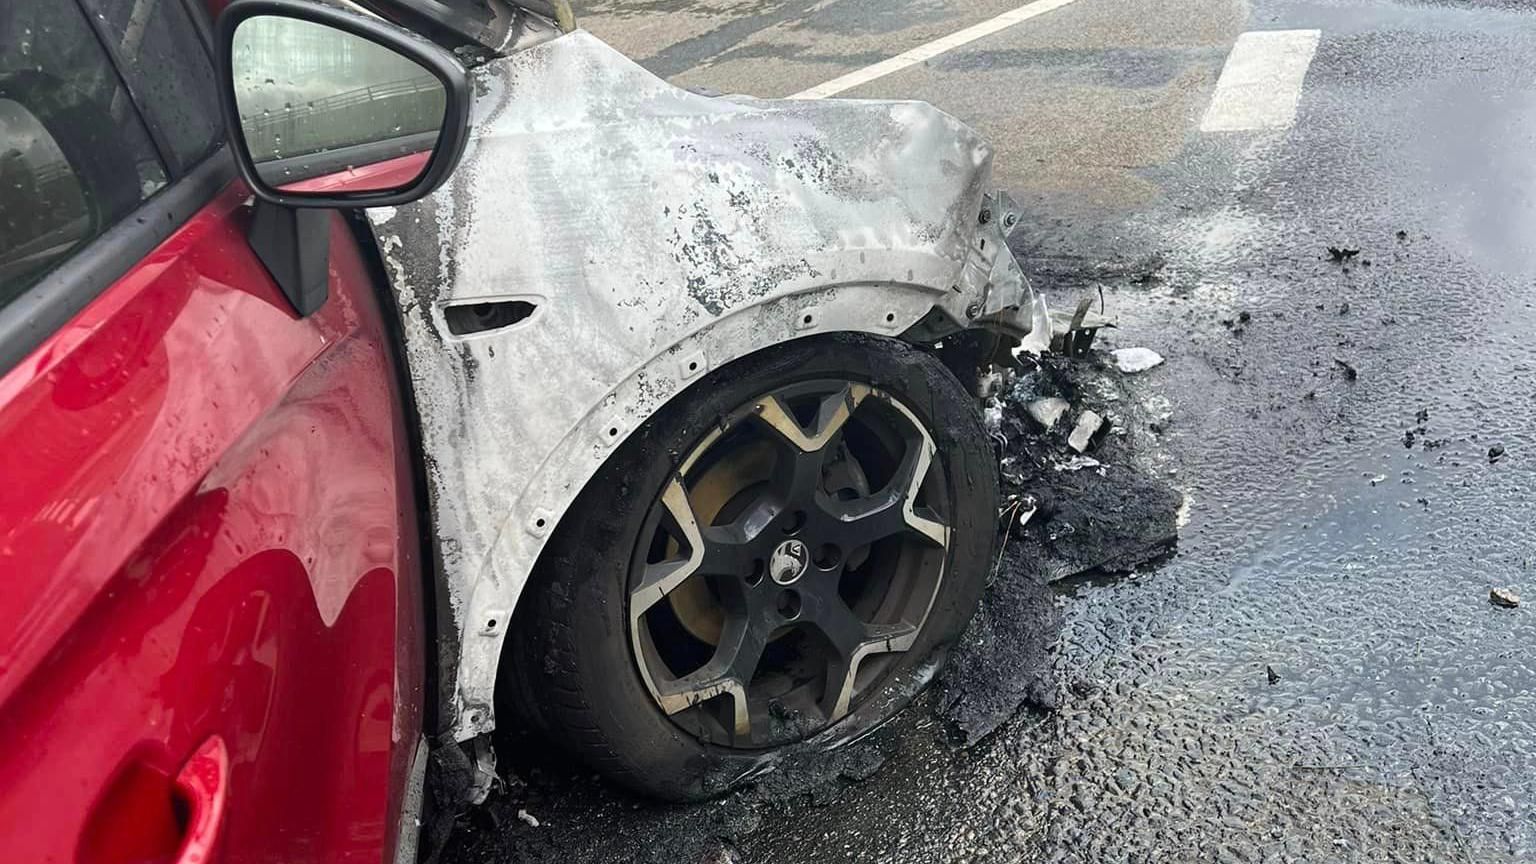 Tyre melted into road surface